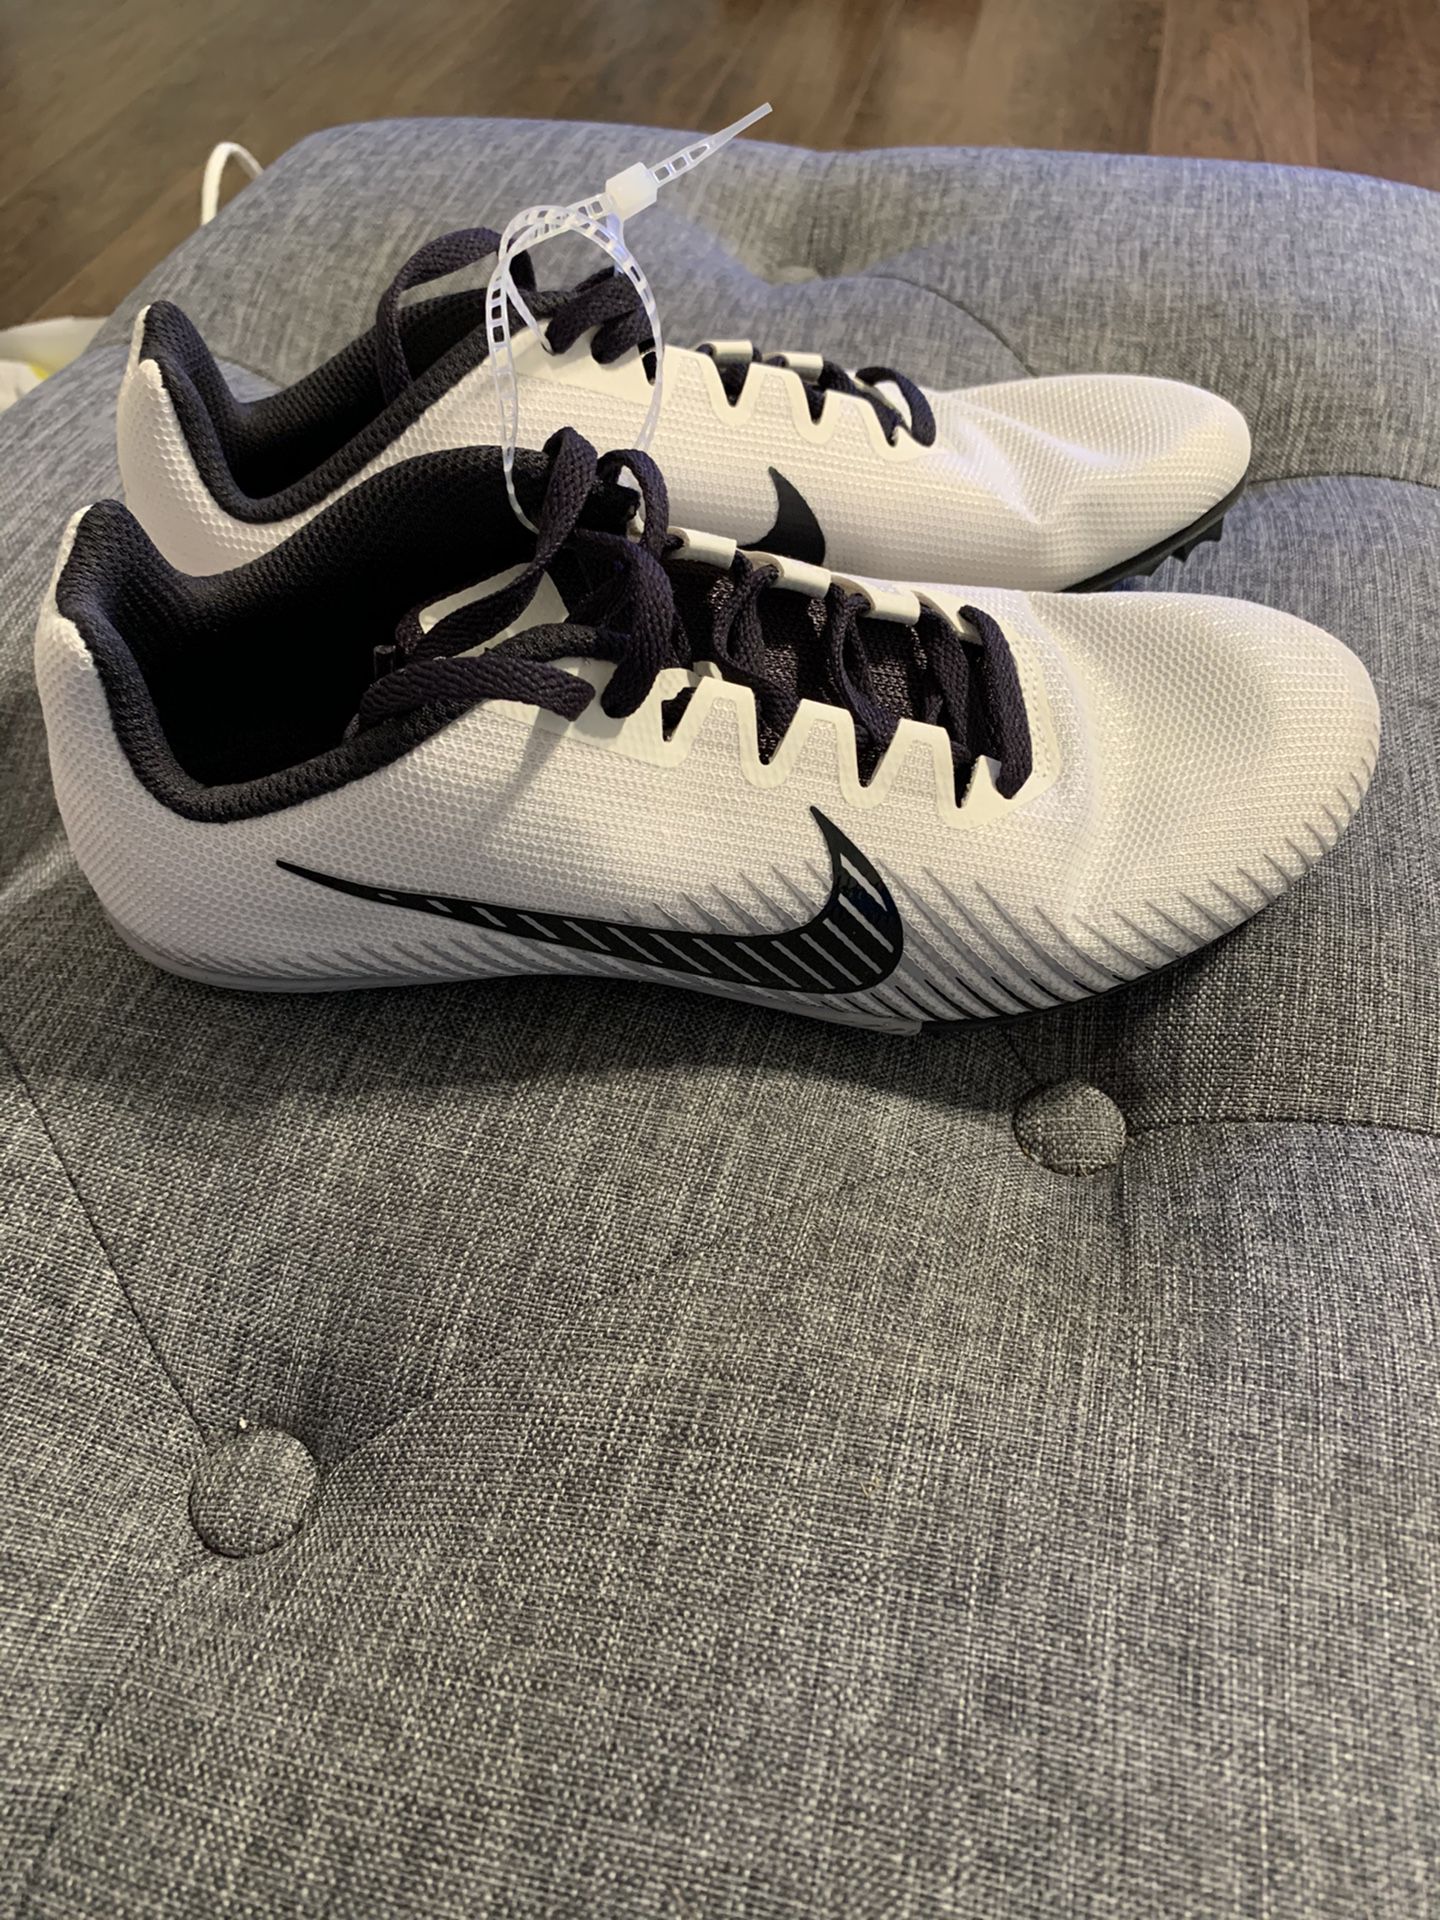 Nike Zoom Rival Platinum Track Spikes